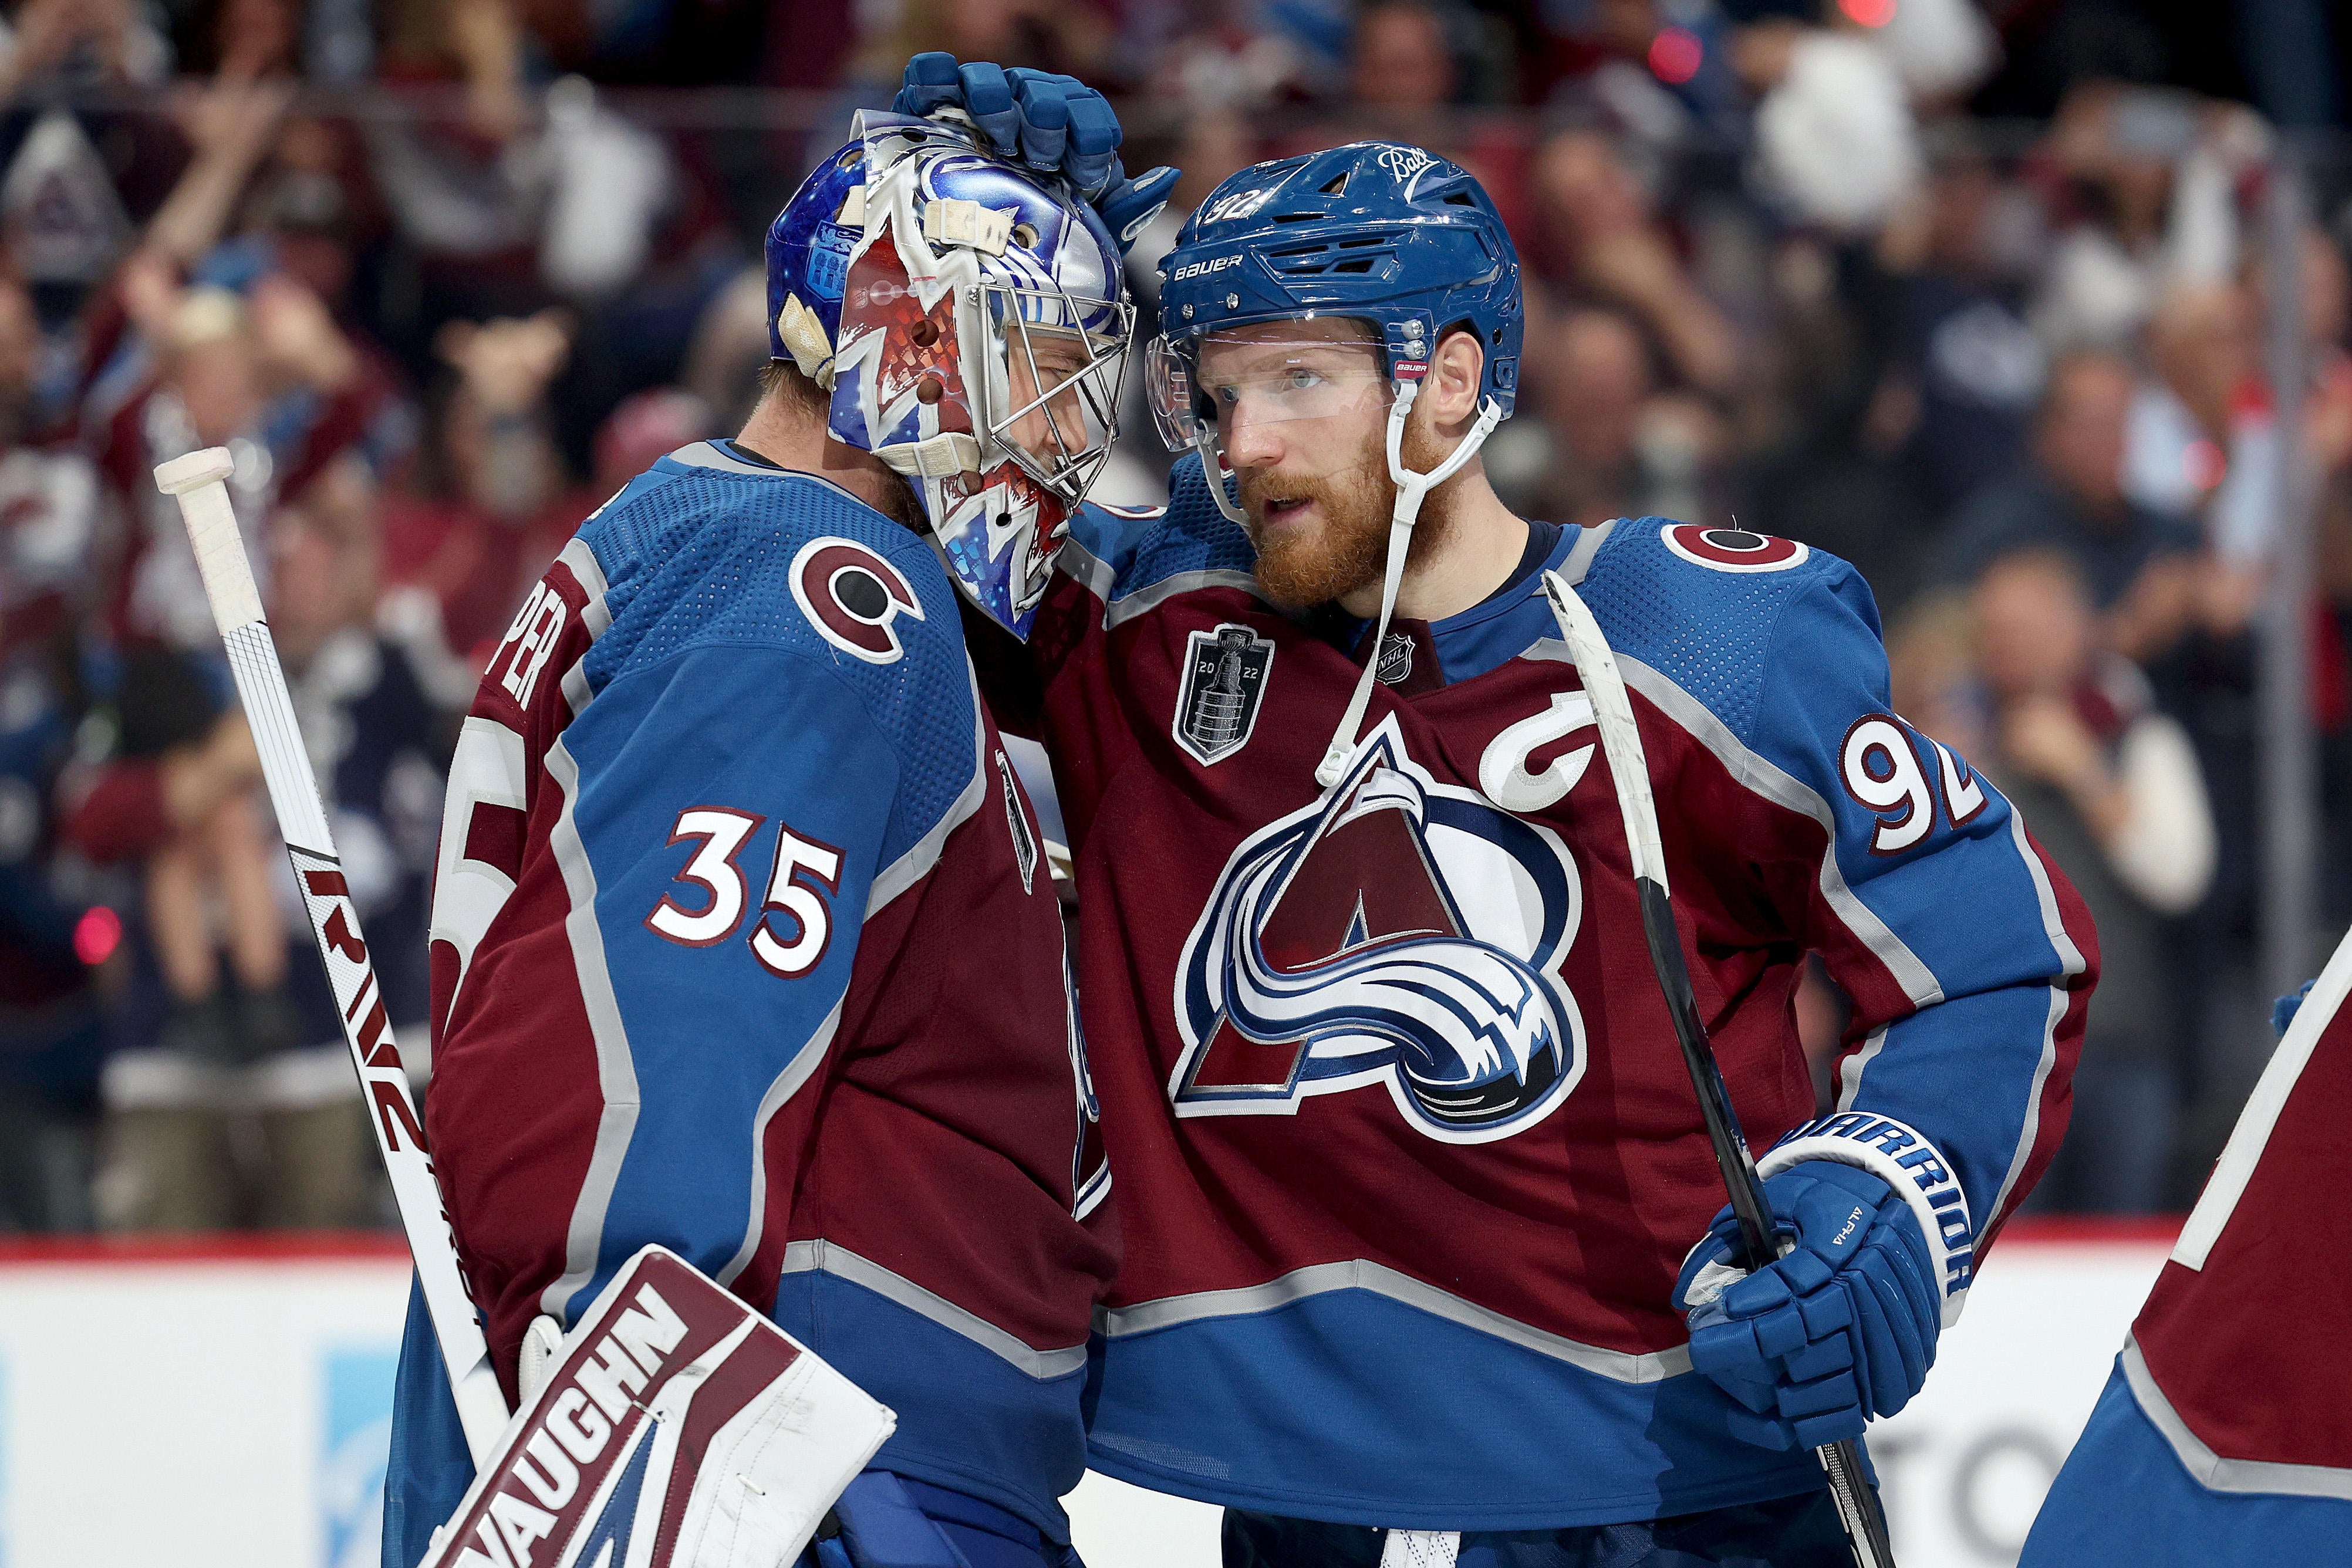 Reigning NHL champion Lightning in 2-0 hole to Avalanche